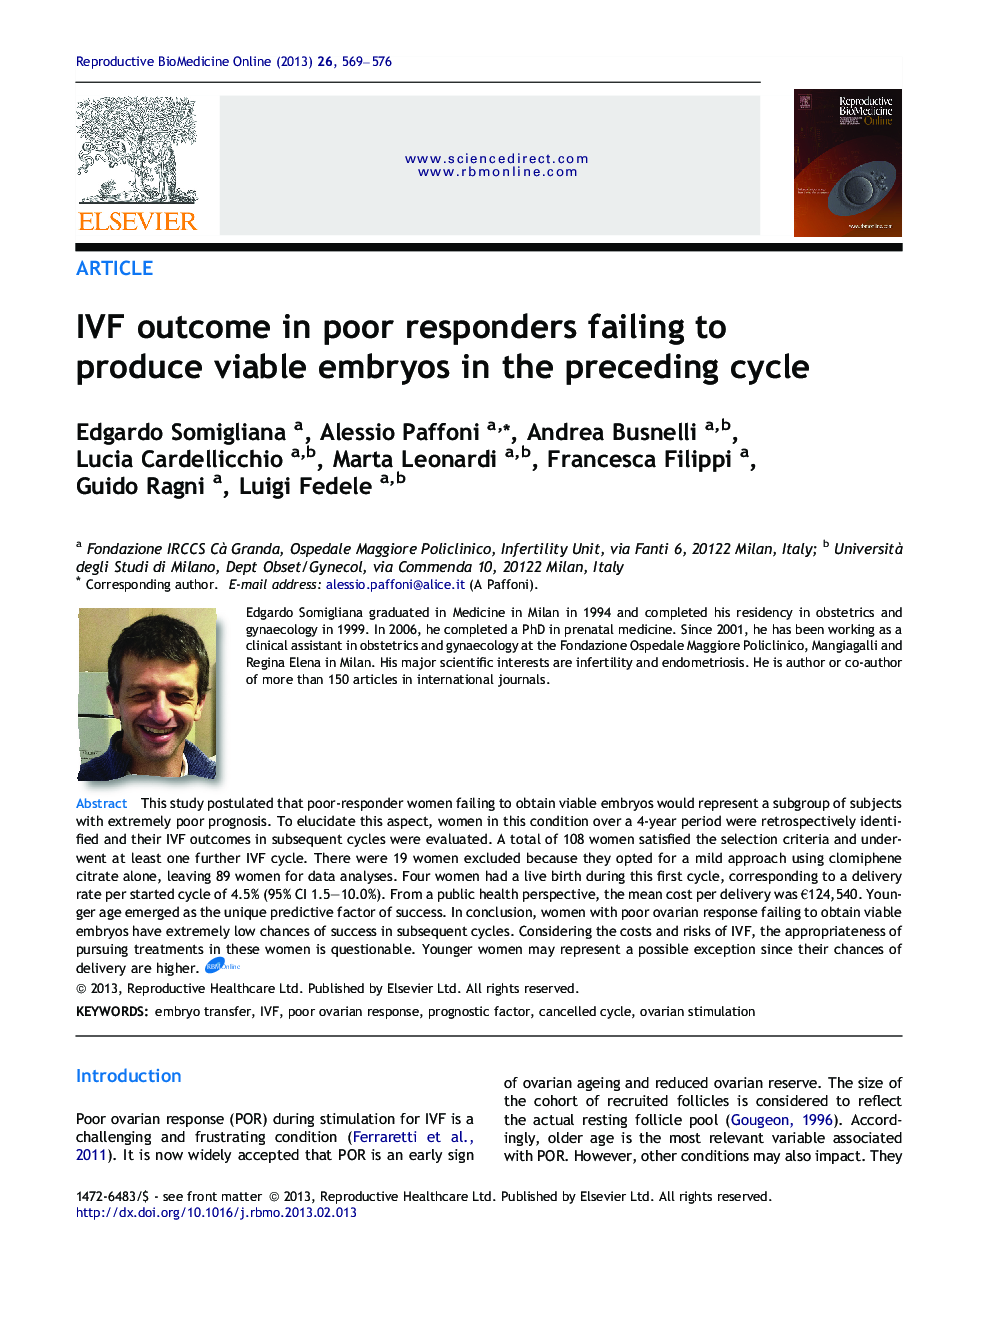 IVF outcome in poor responders failing to produce viable embryos in the preceding cycle